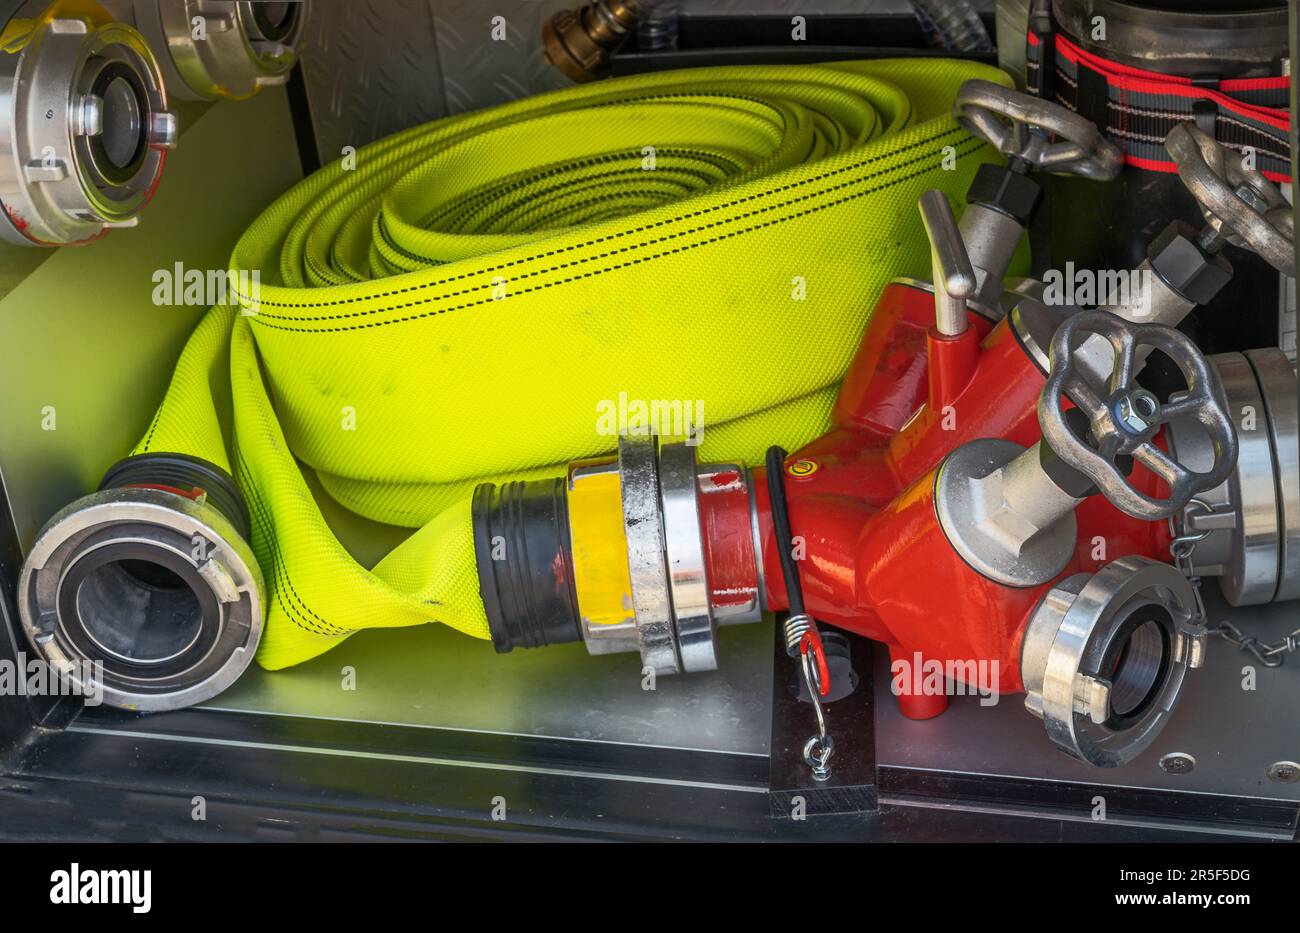 Emergency equipment inside a red fire truck Stock Photo - Alamy